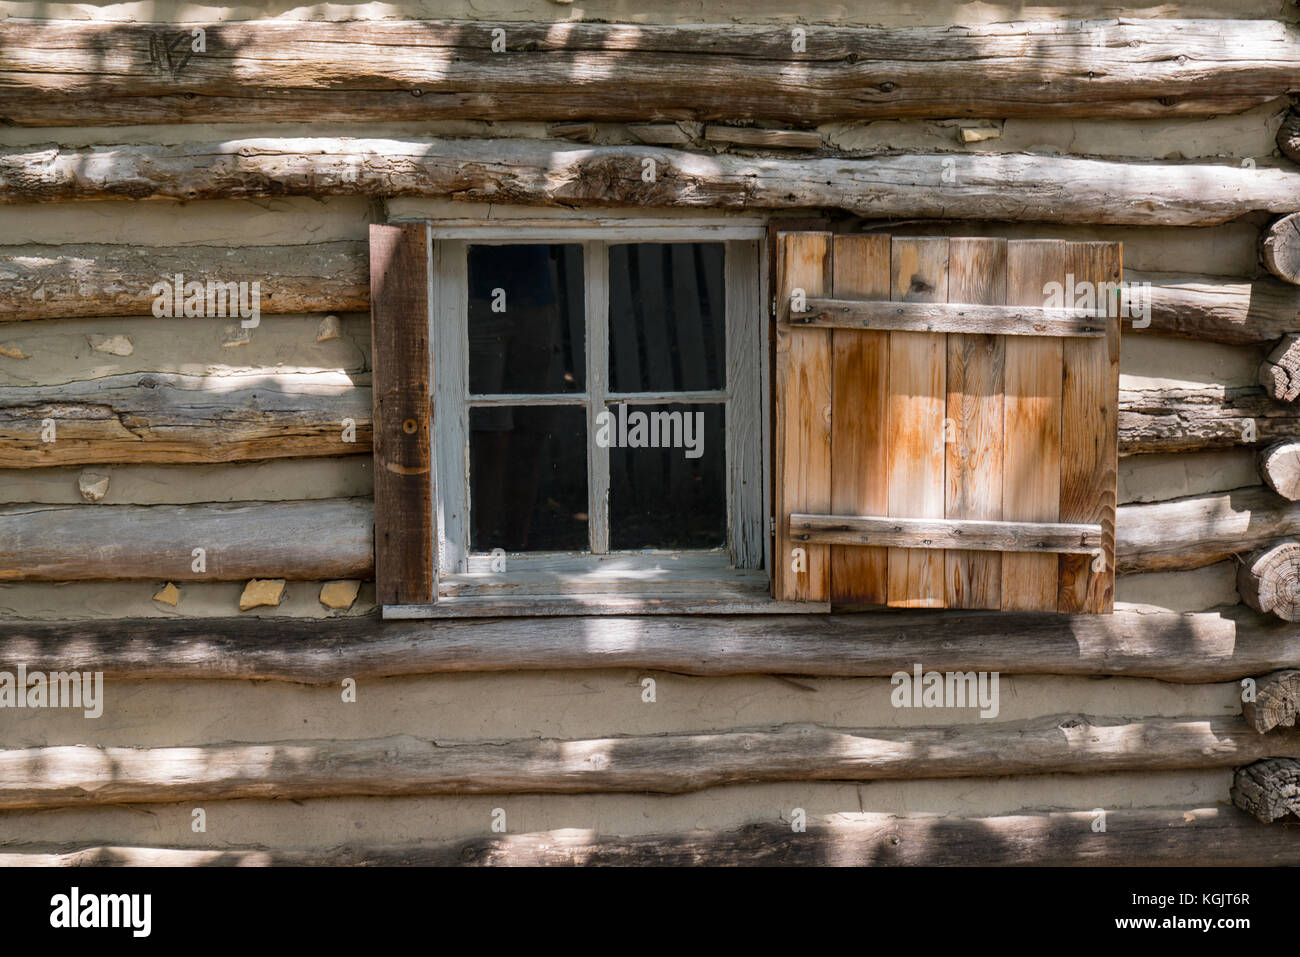 Old wooden log house window background Stock Photo